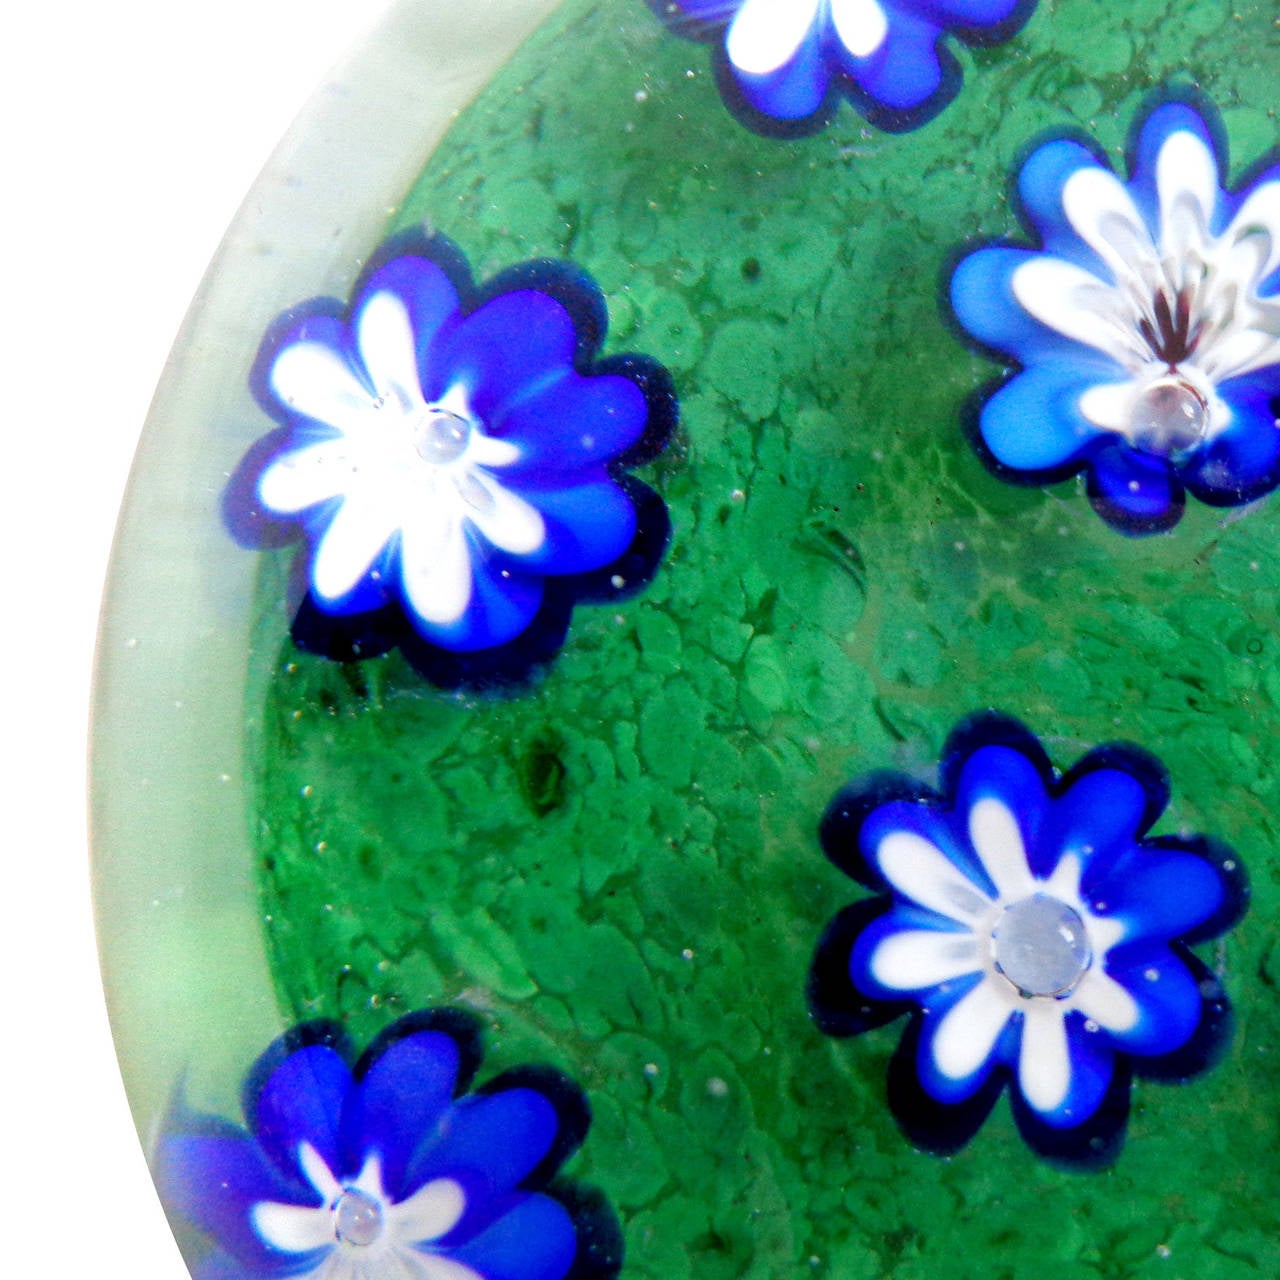 Free shipping worldwide! See details below description.

Gorgeous set of Murano hand blown red and blue millefiori flower garden paperweights. Attributed to designer Galliano Ferro. The flowers grow out of a bed of green, just beautiful! Blue